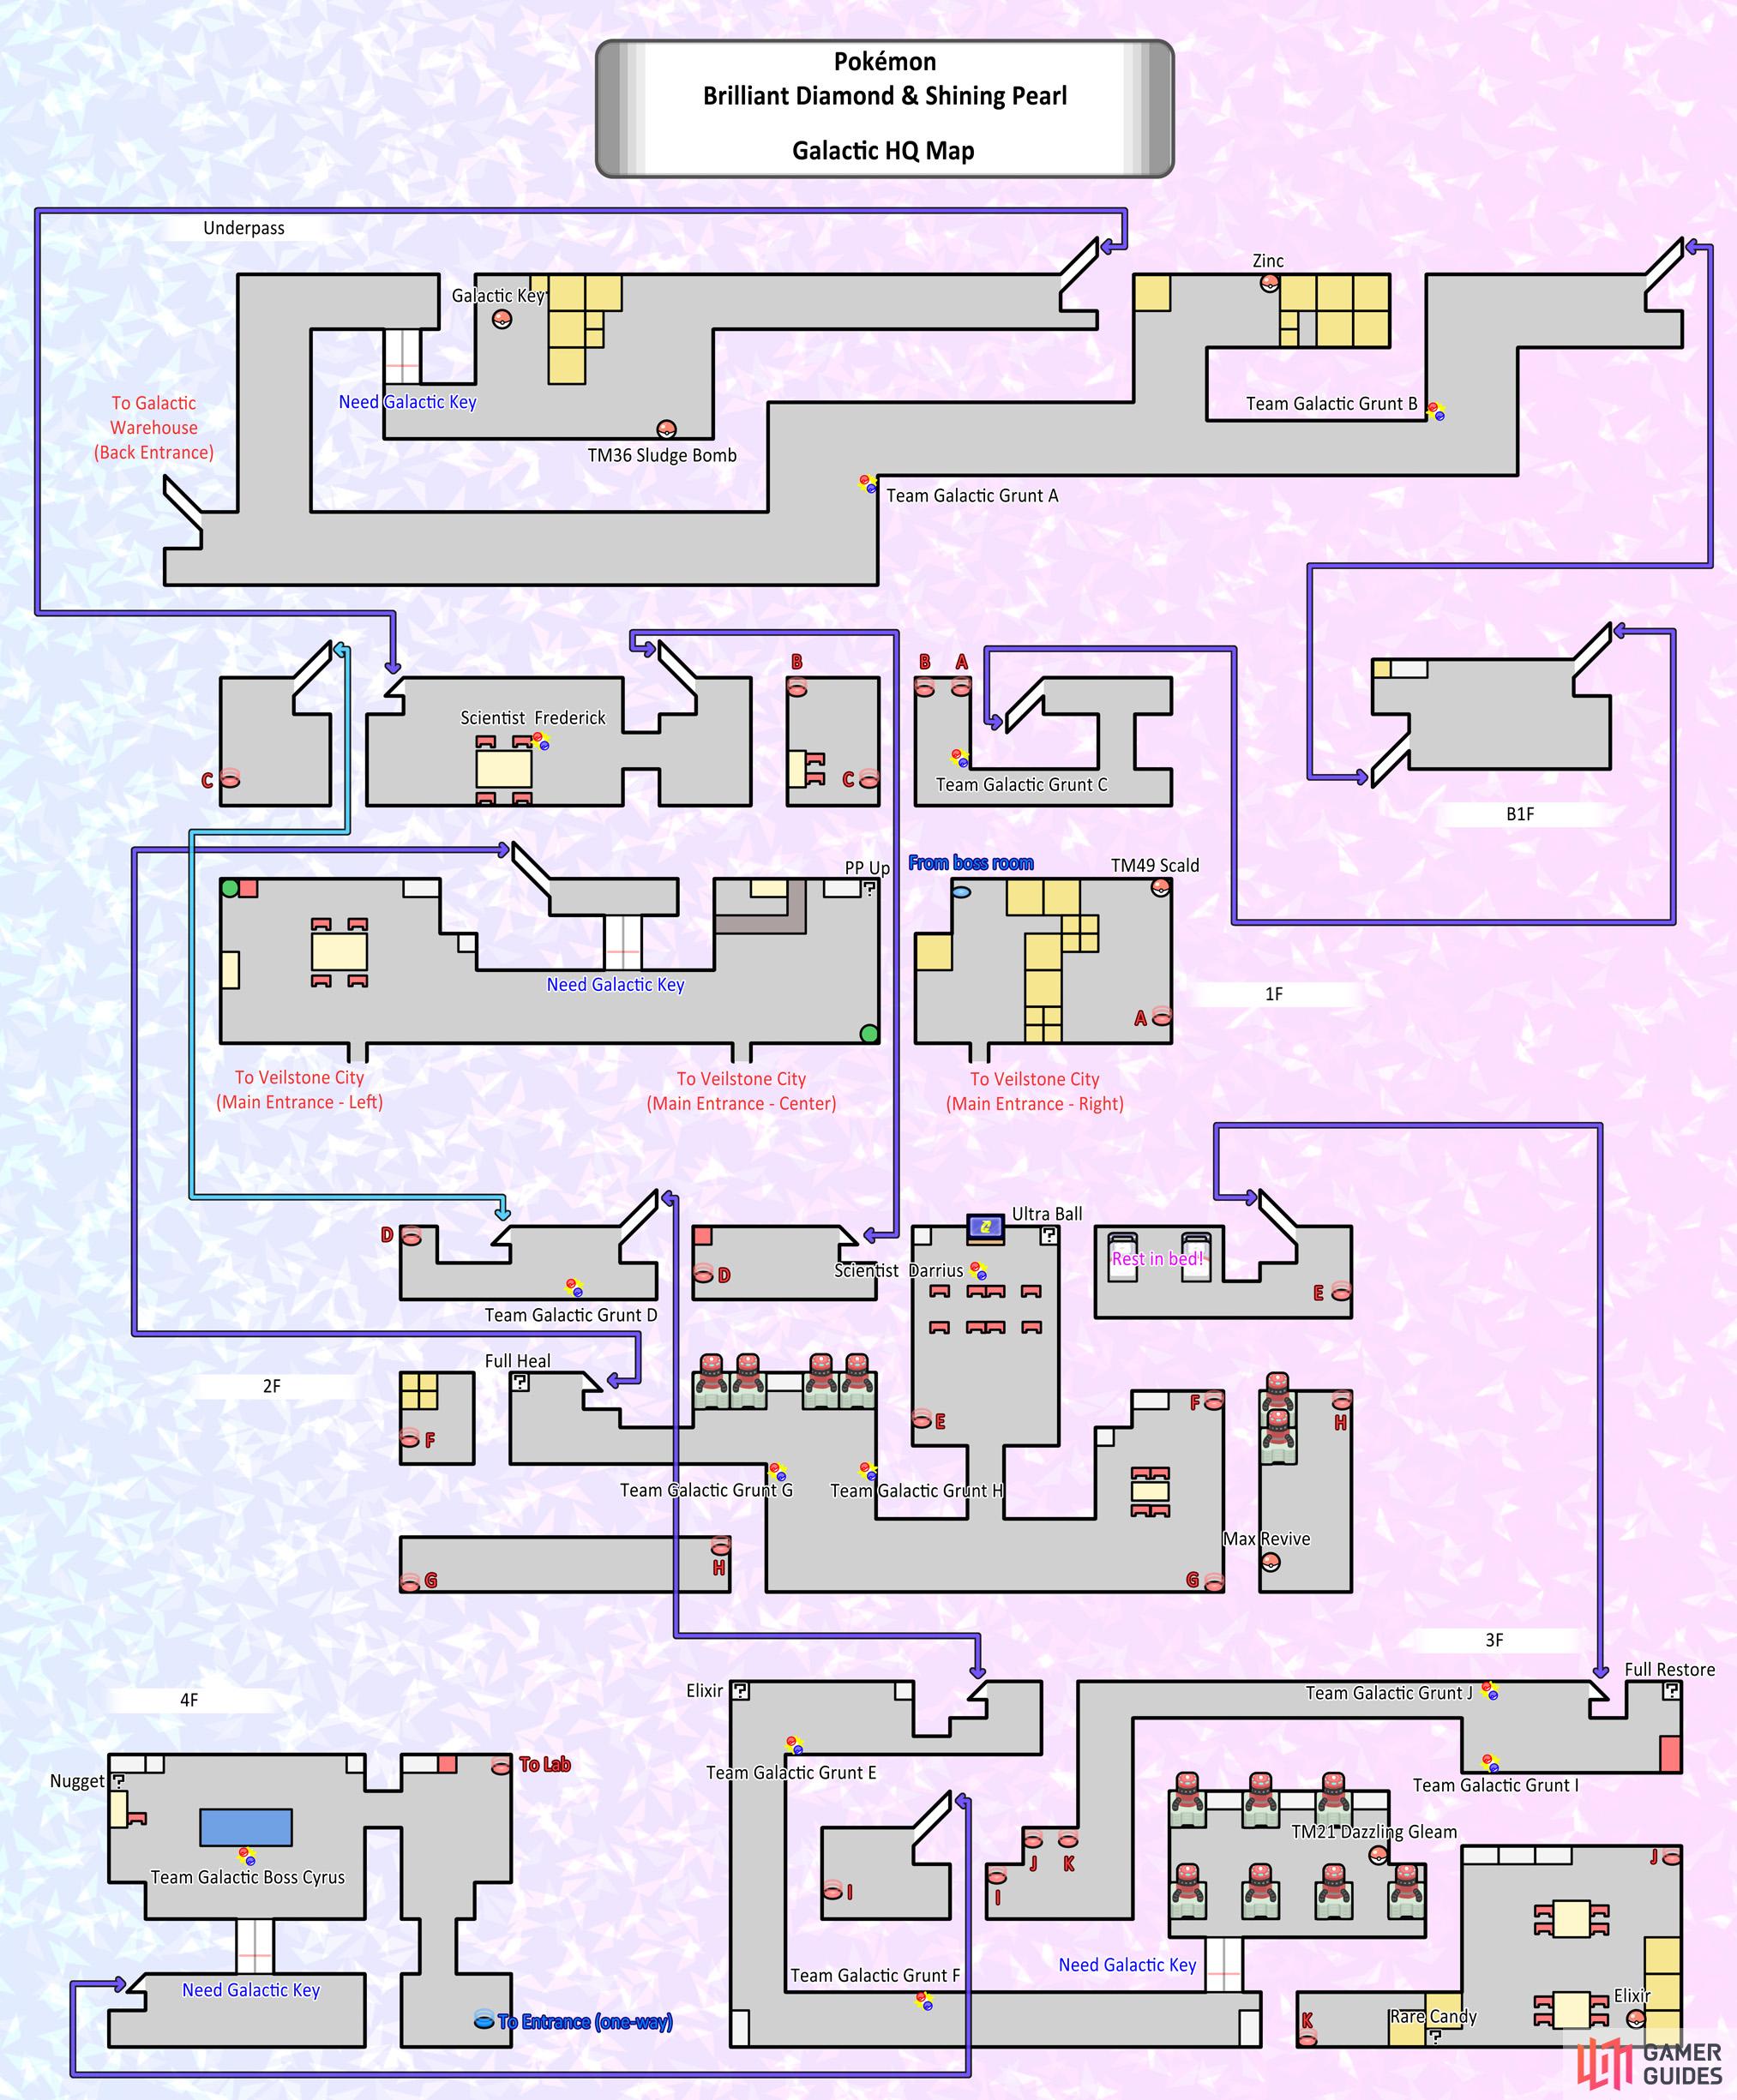 Full map of the Galactic HQ. You’ll probably need it!